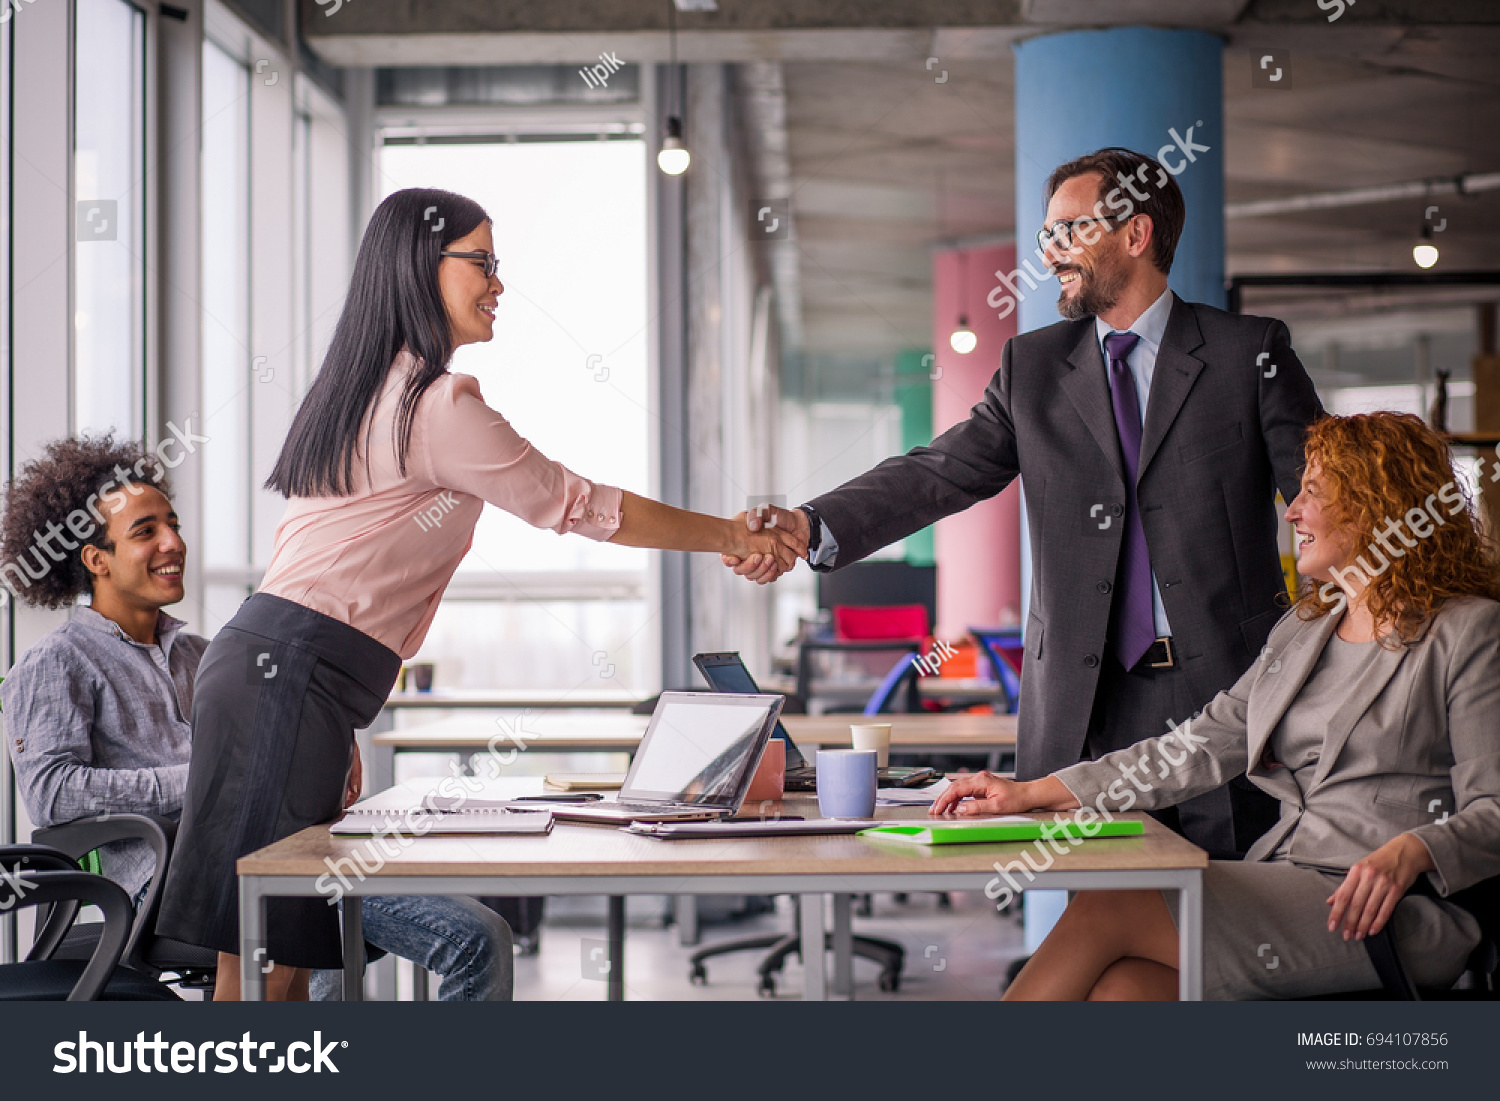 Two business teams successfully negotiating, shaking hands. At meeting table business groups shaking hands on completed deal. Man and woman handshake. #694107856